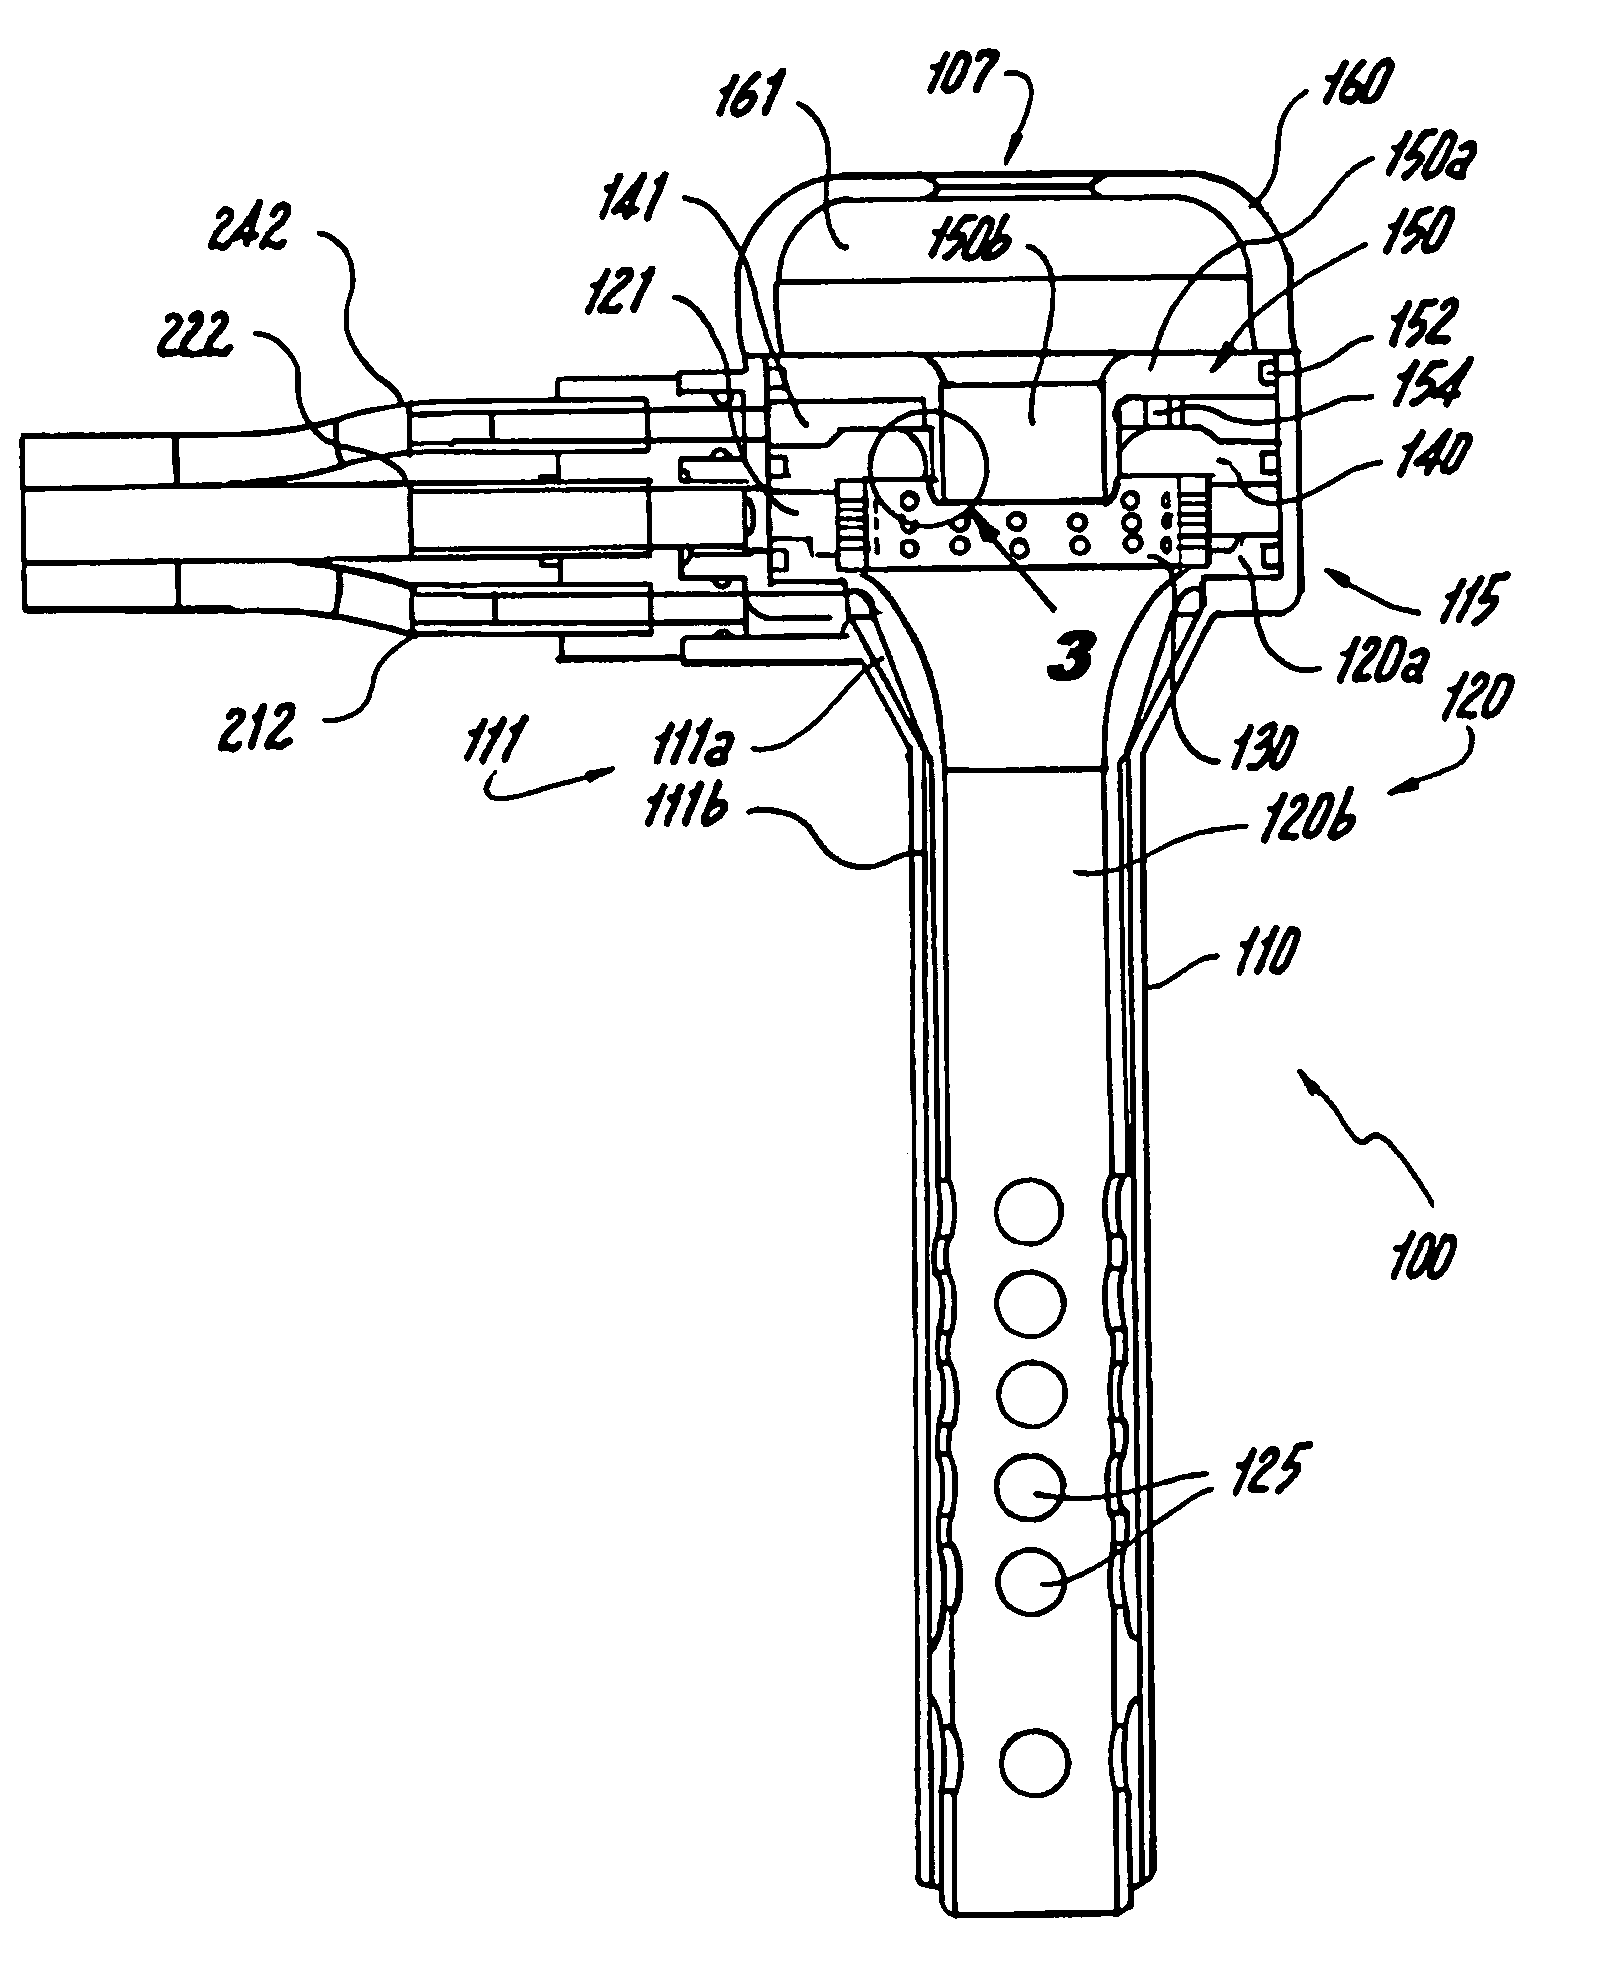 System for surgical insufflation and gas recirculation